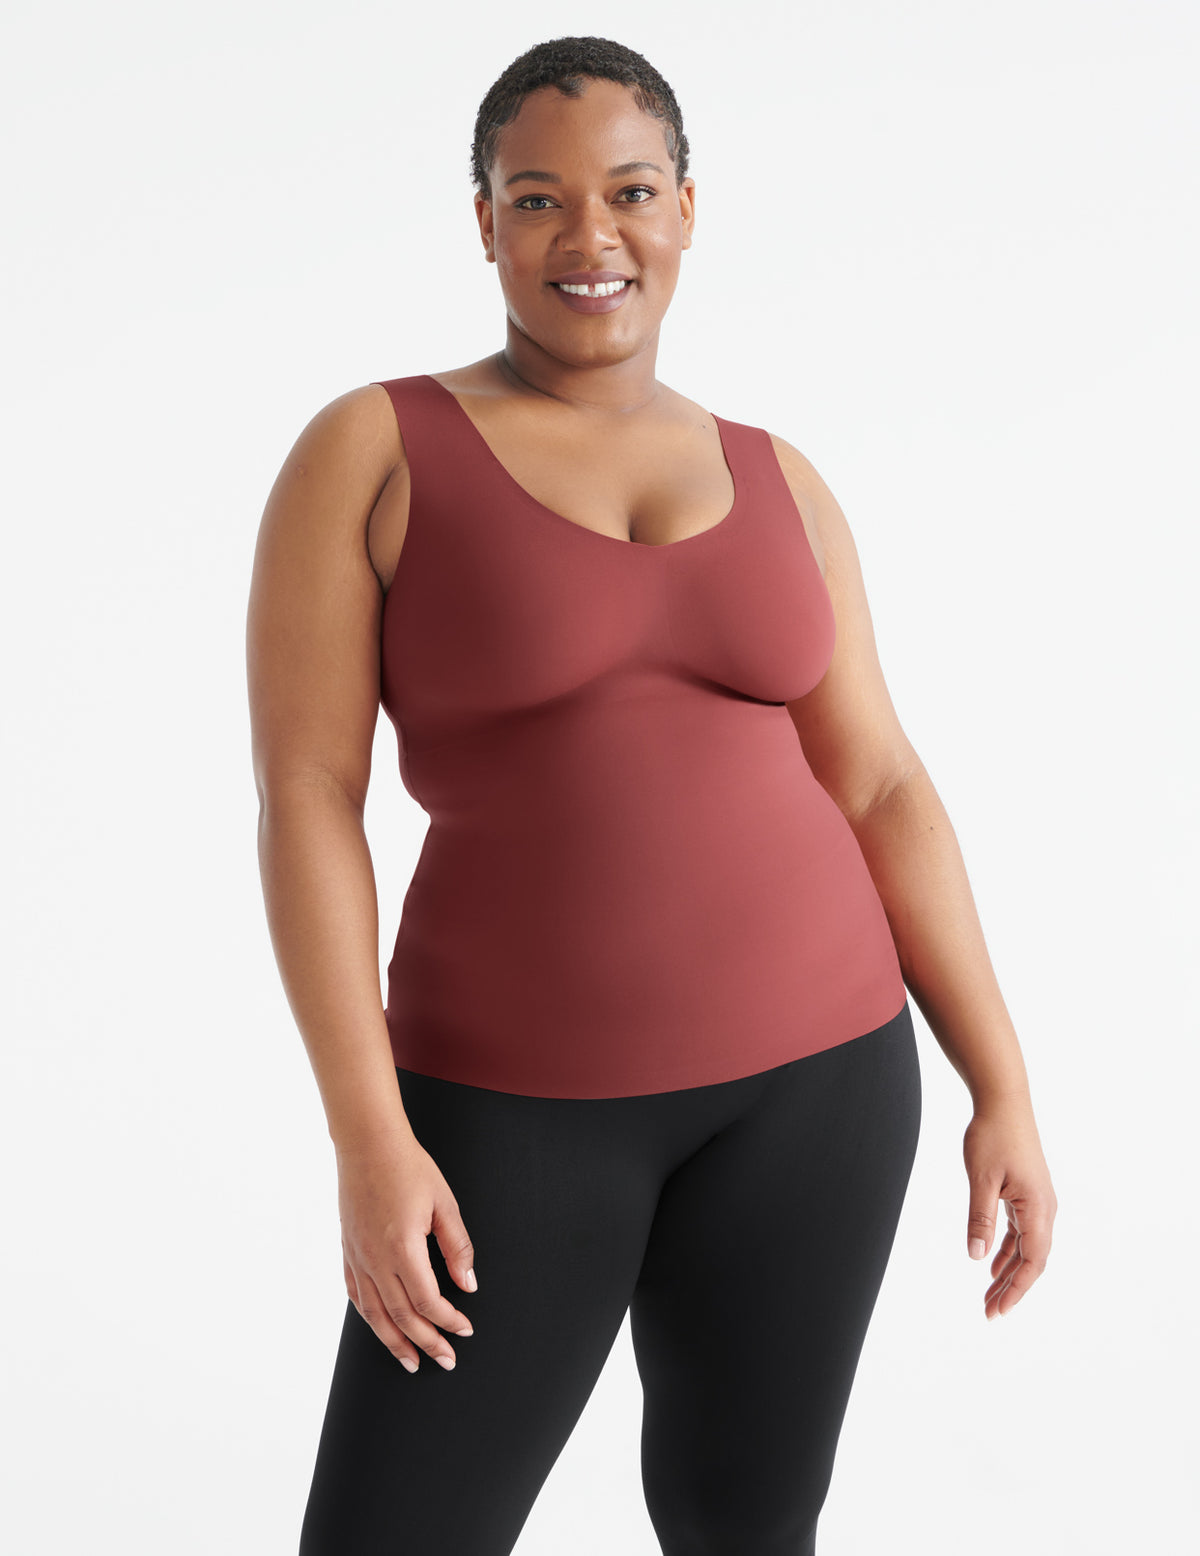 Shop new arrivals from Spanx and Skims including shapewear, bras, clothing  and more - Good Morning America